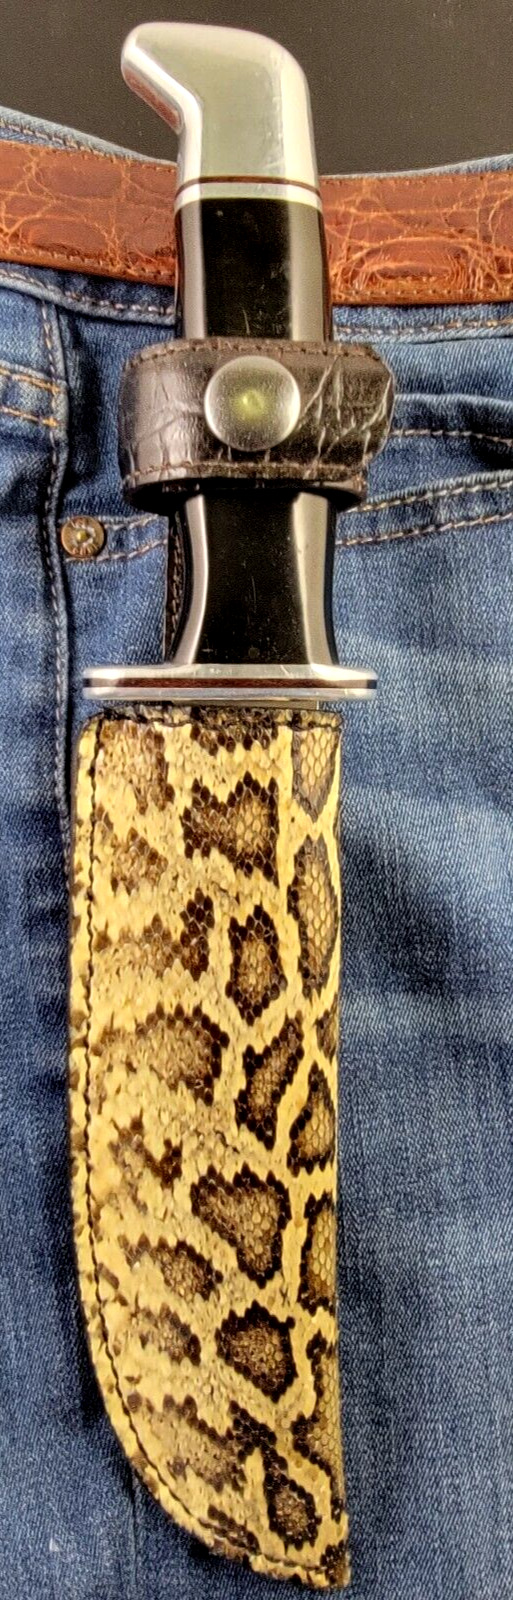 Buck Knives 119 Sheath Right Pull with Authentic PYTHON Skin custom made